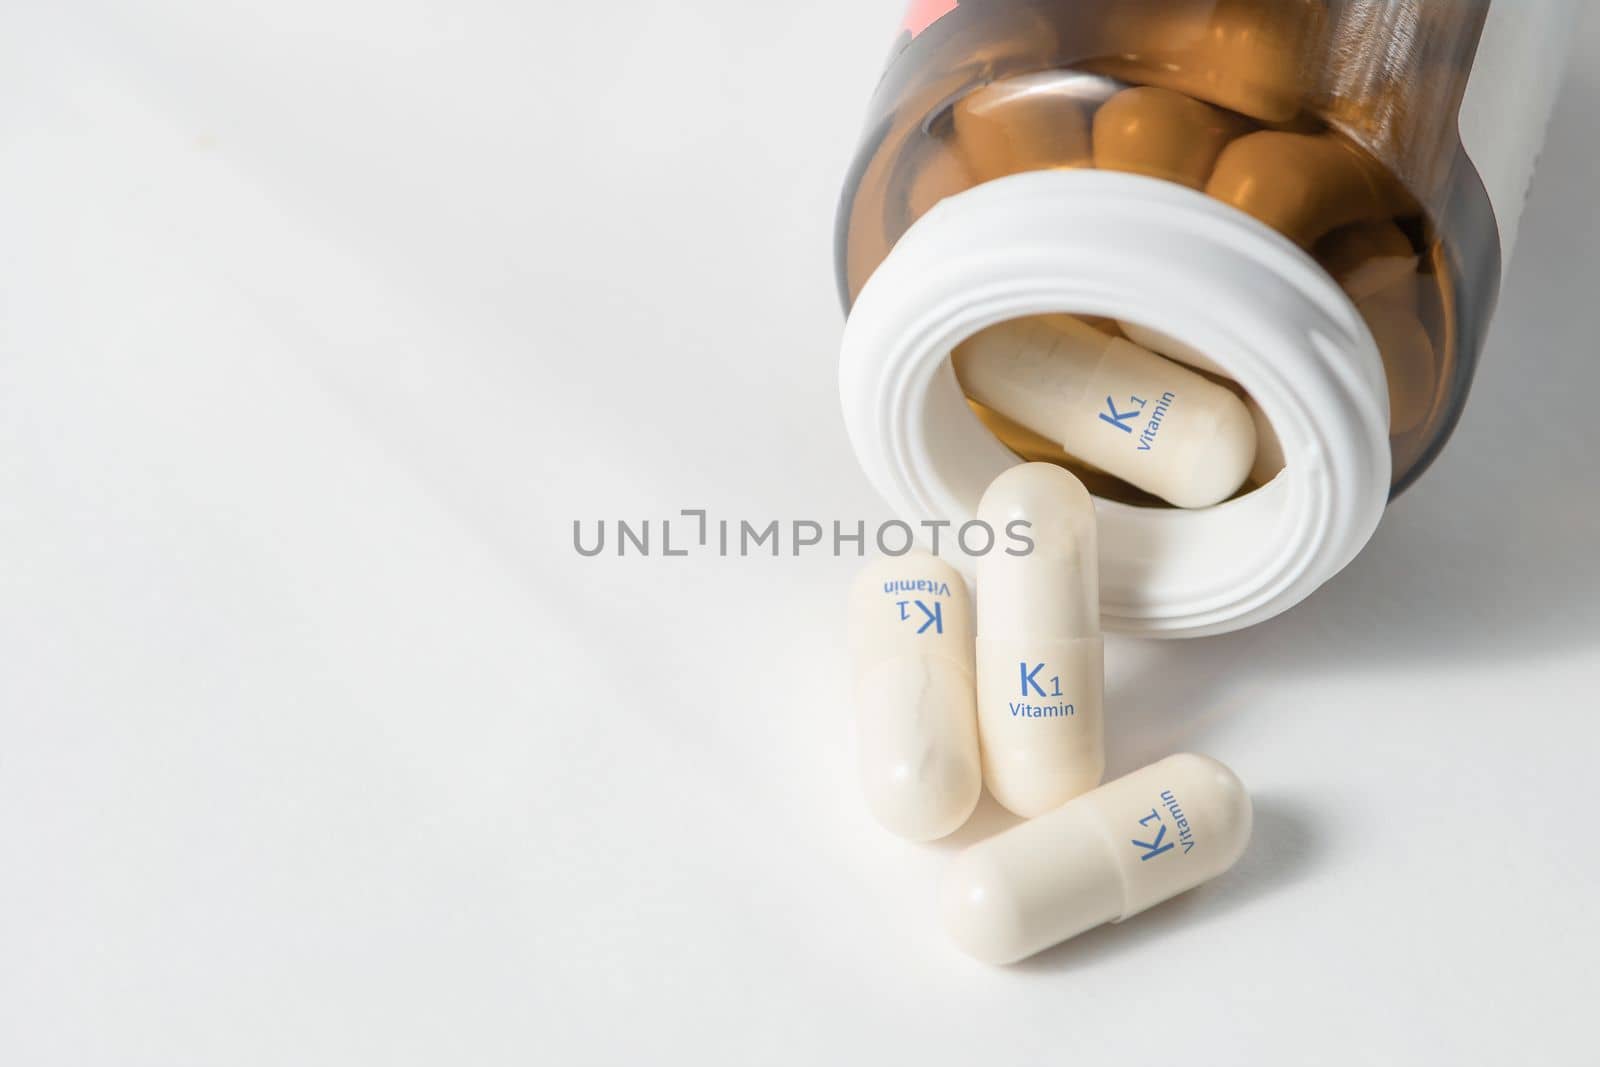 Vitamin K1.Capsules with phylloquinone increase blood clotting, stimulate wound healing. White capsules of vitamin K1 or phylloquinone are scattered on the table with copy space on a white background